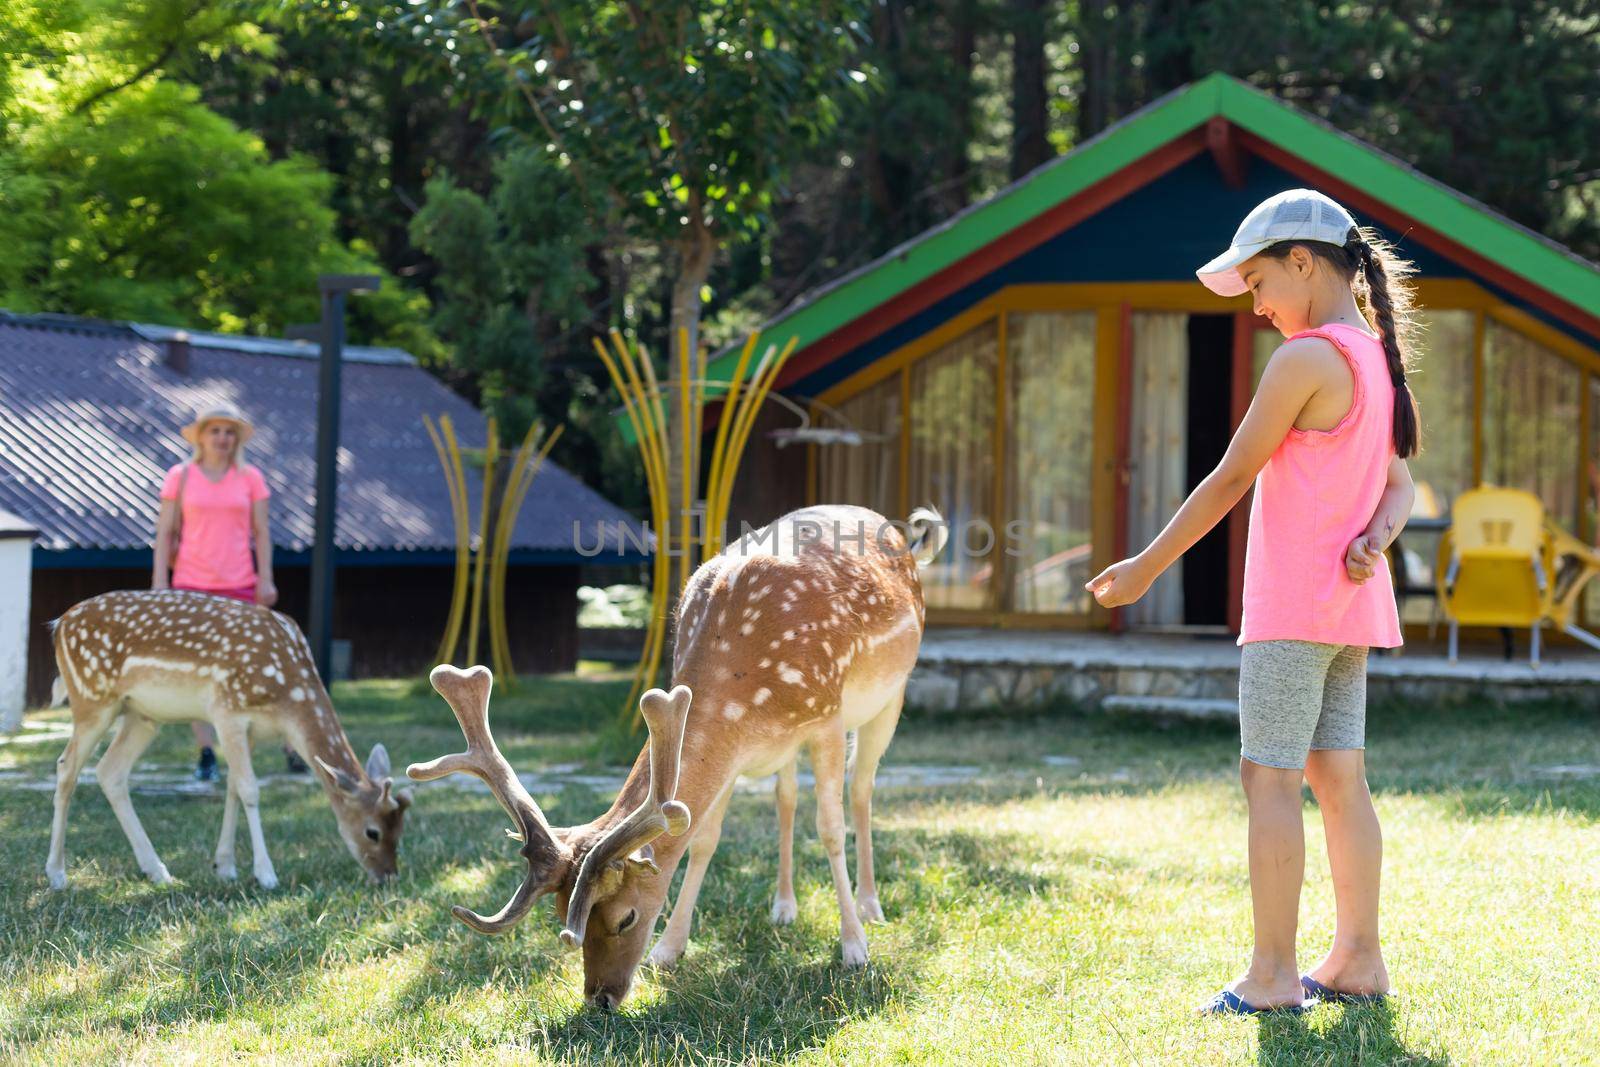 Child feeding wild deer at petting zoo. Kids feed animals at outdoor. Little girl watching reindeer on a farm. Kid and pet animal. Family summer trip to zoological garden. Herd of deers